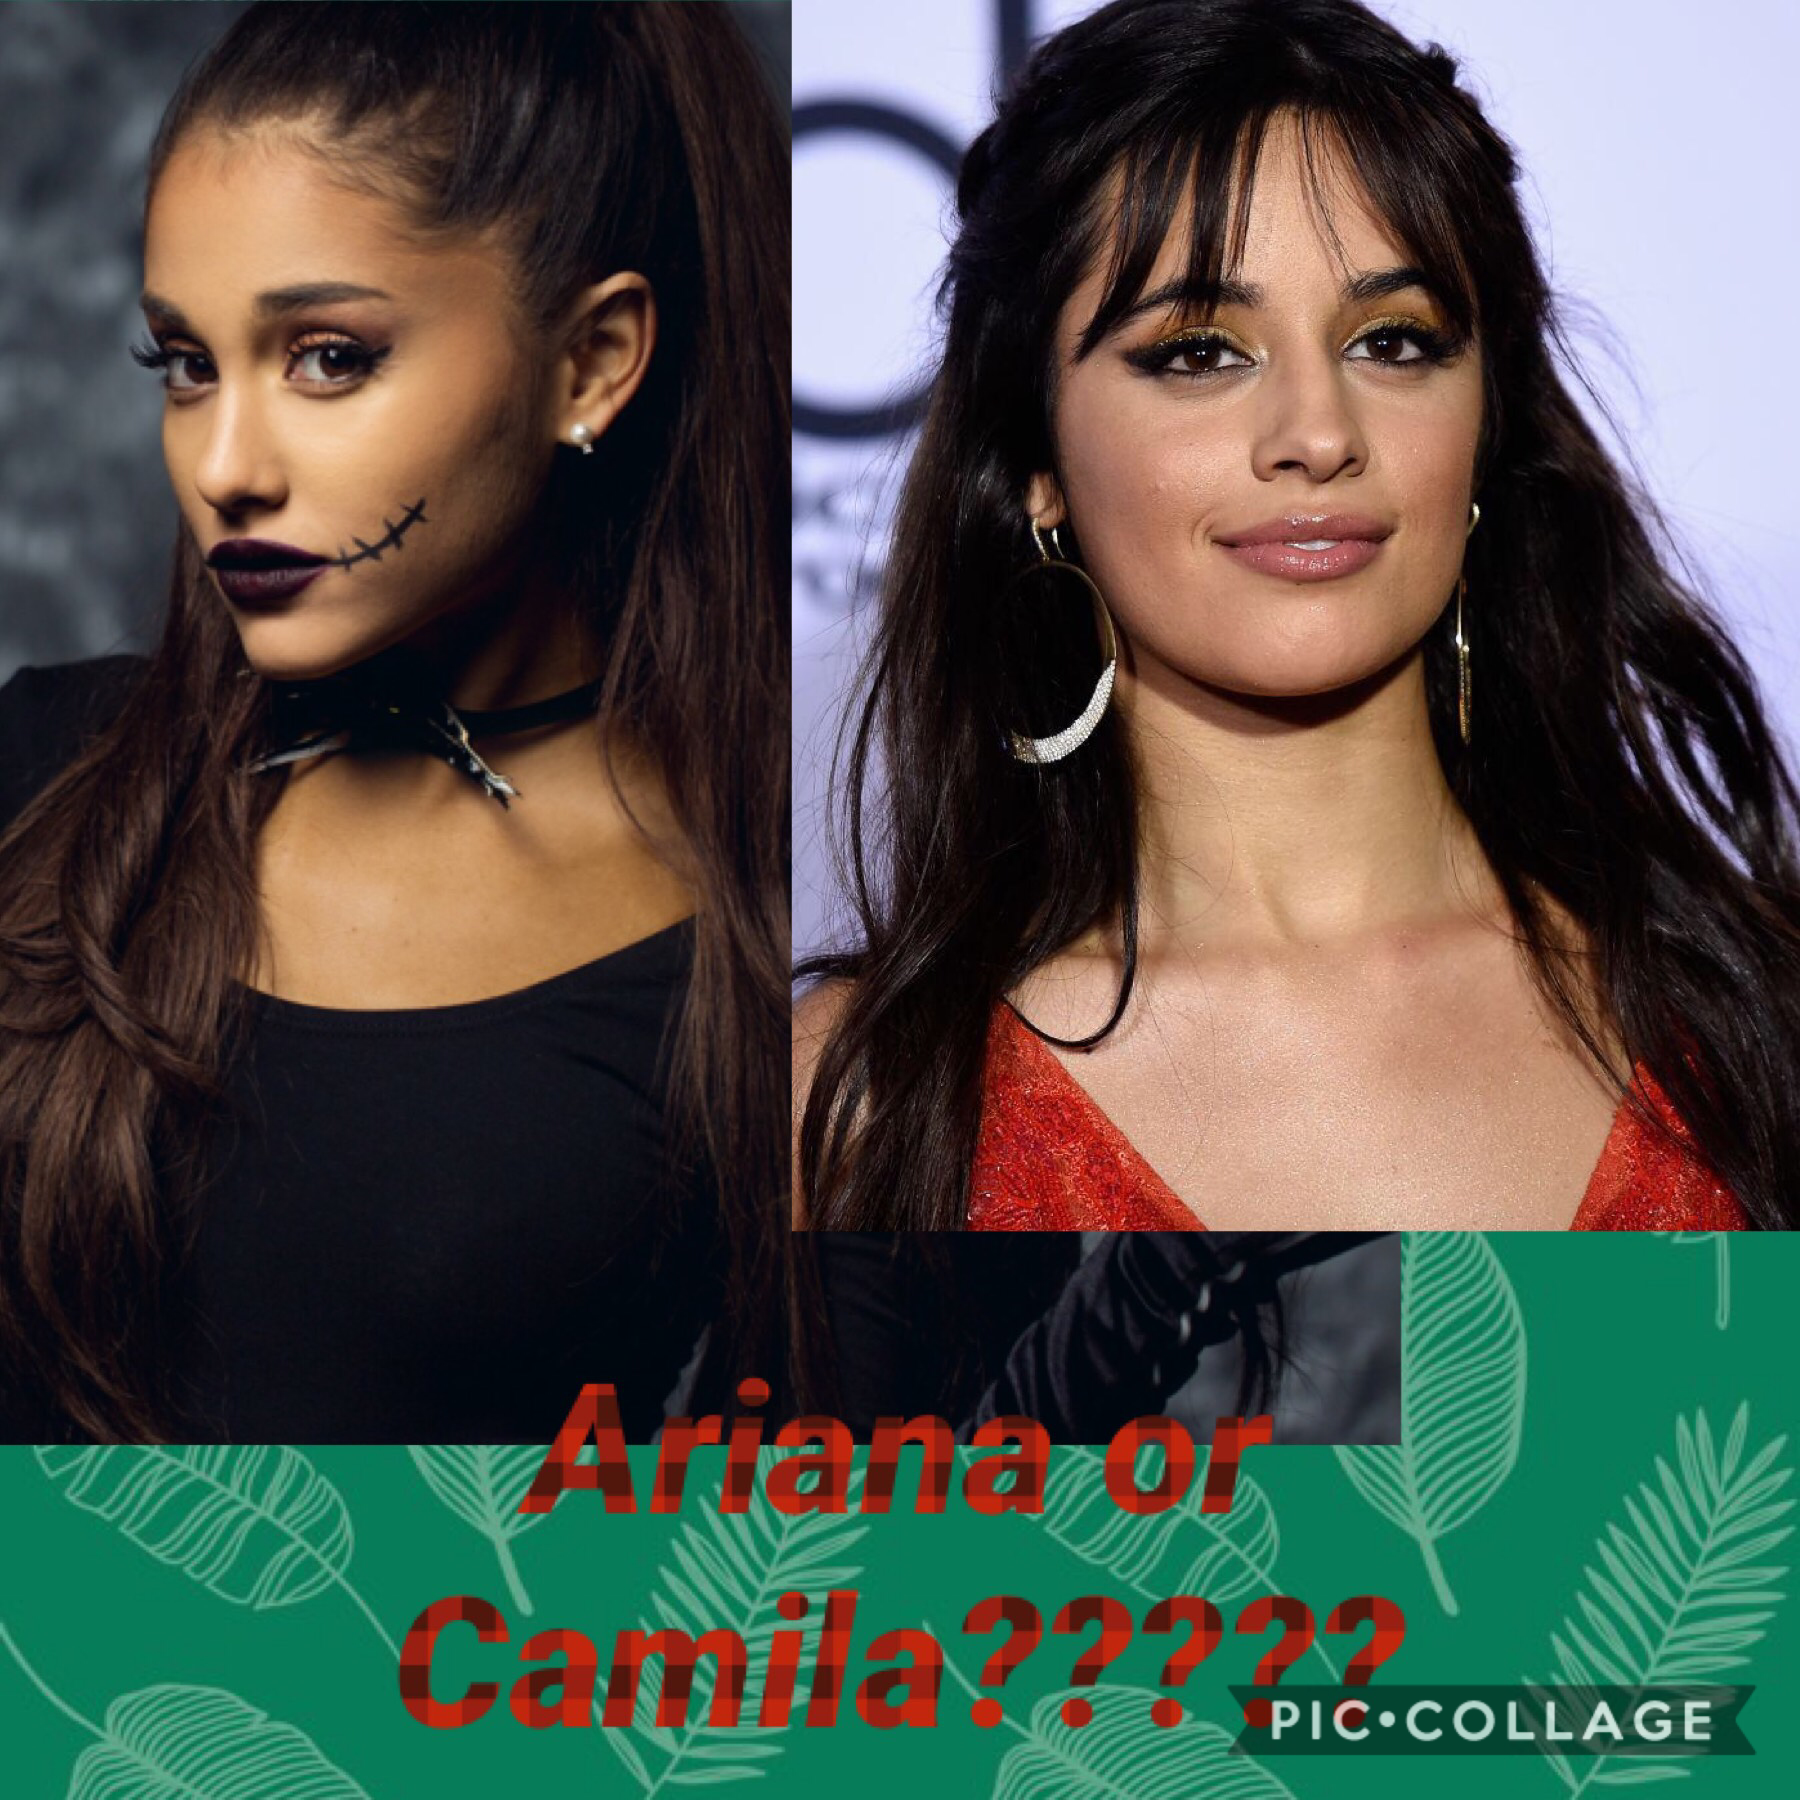 Ariana or Camila???

Comment down below👎👎👎